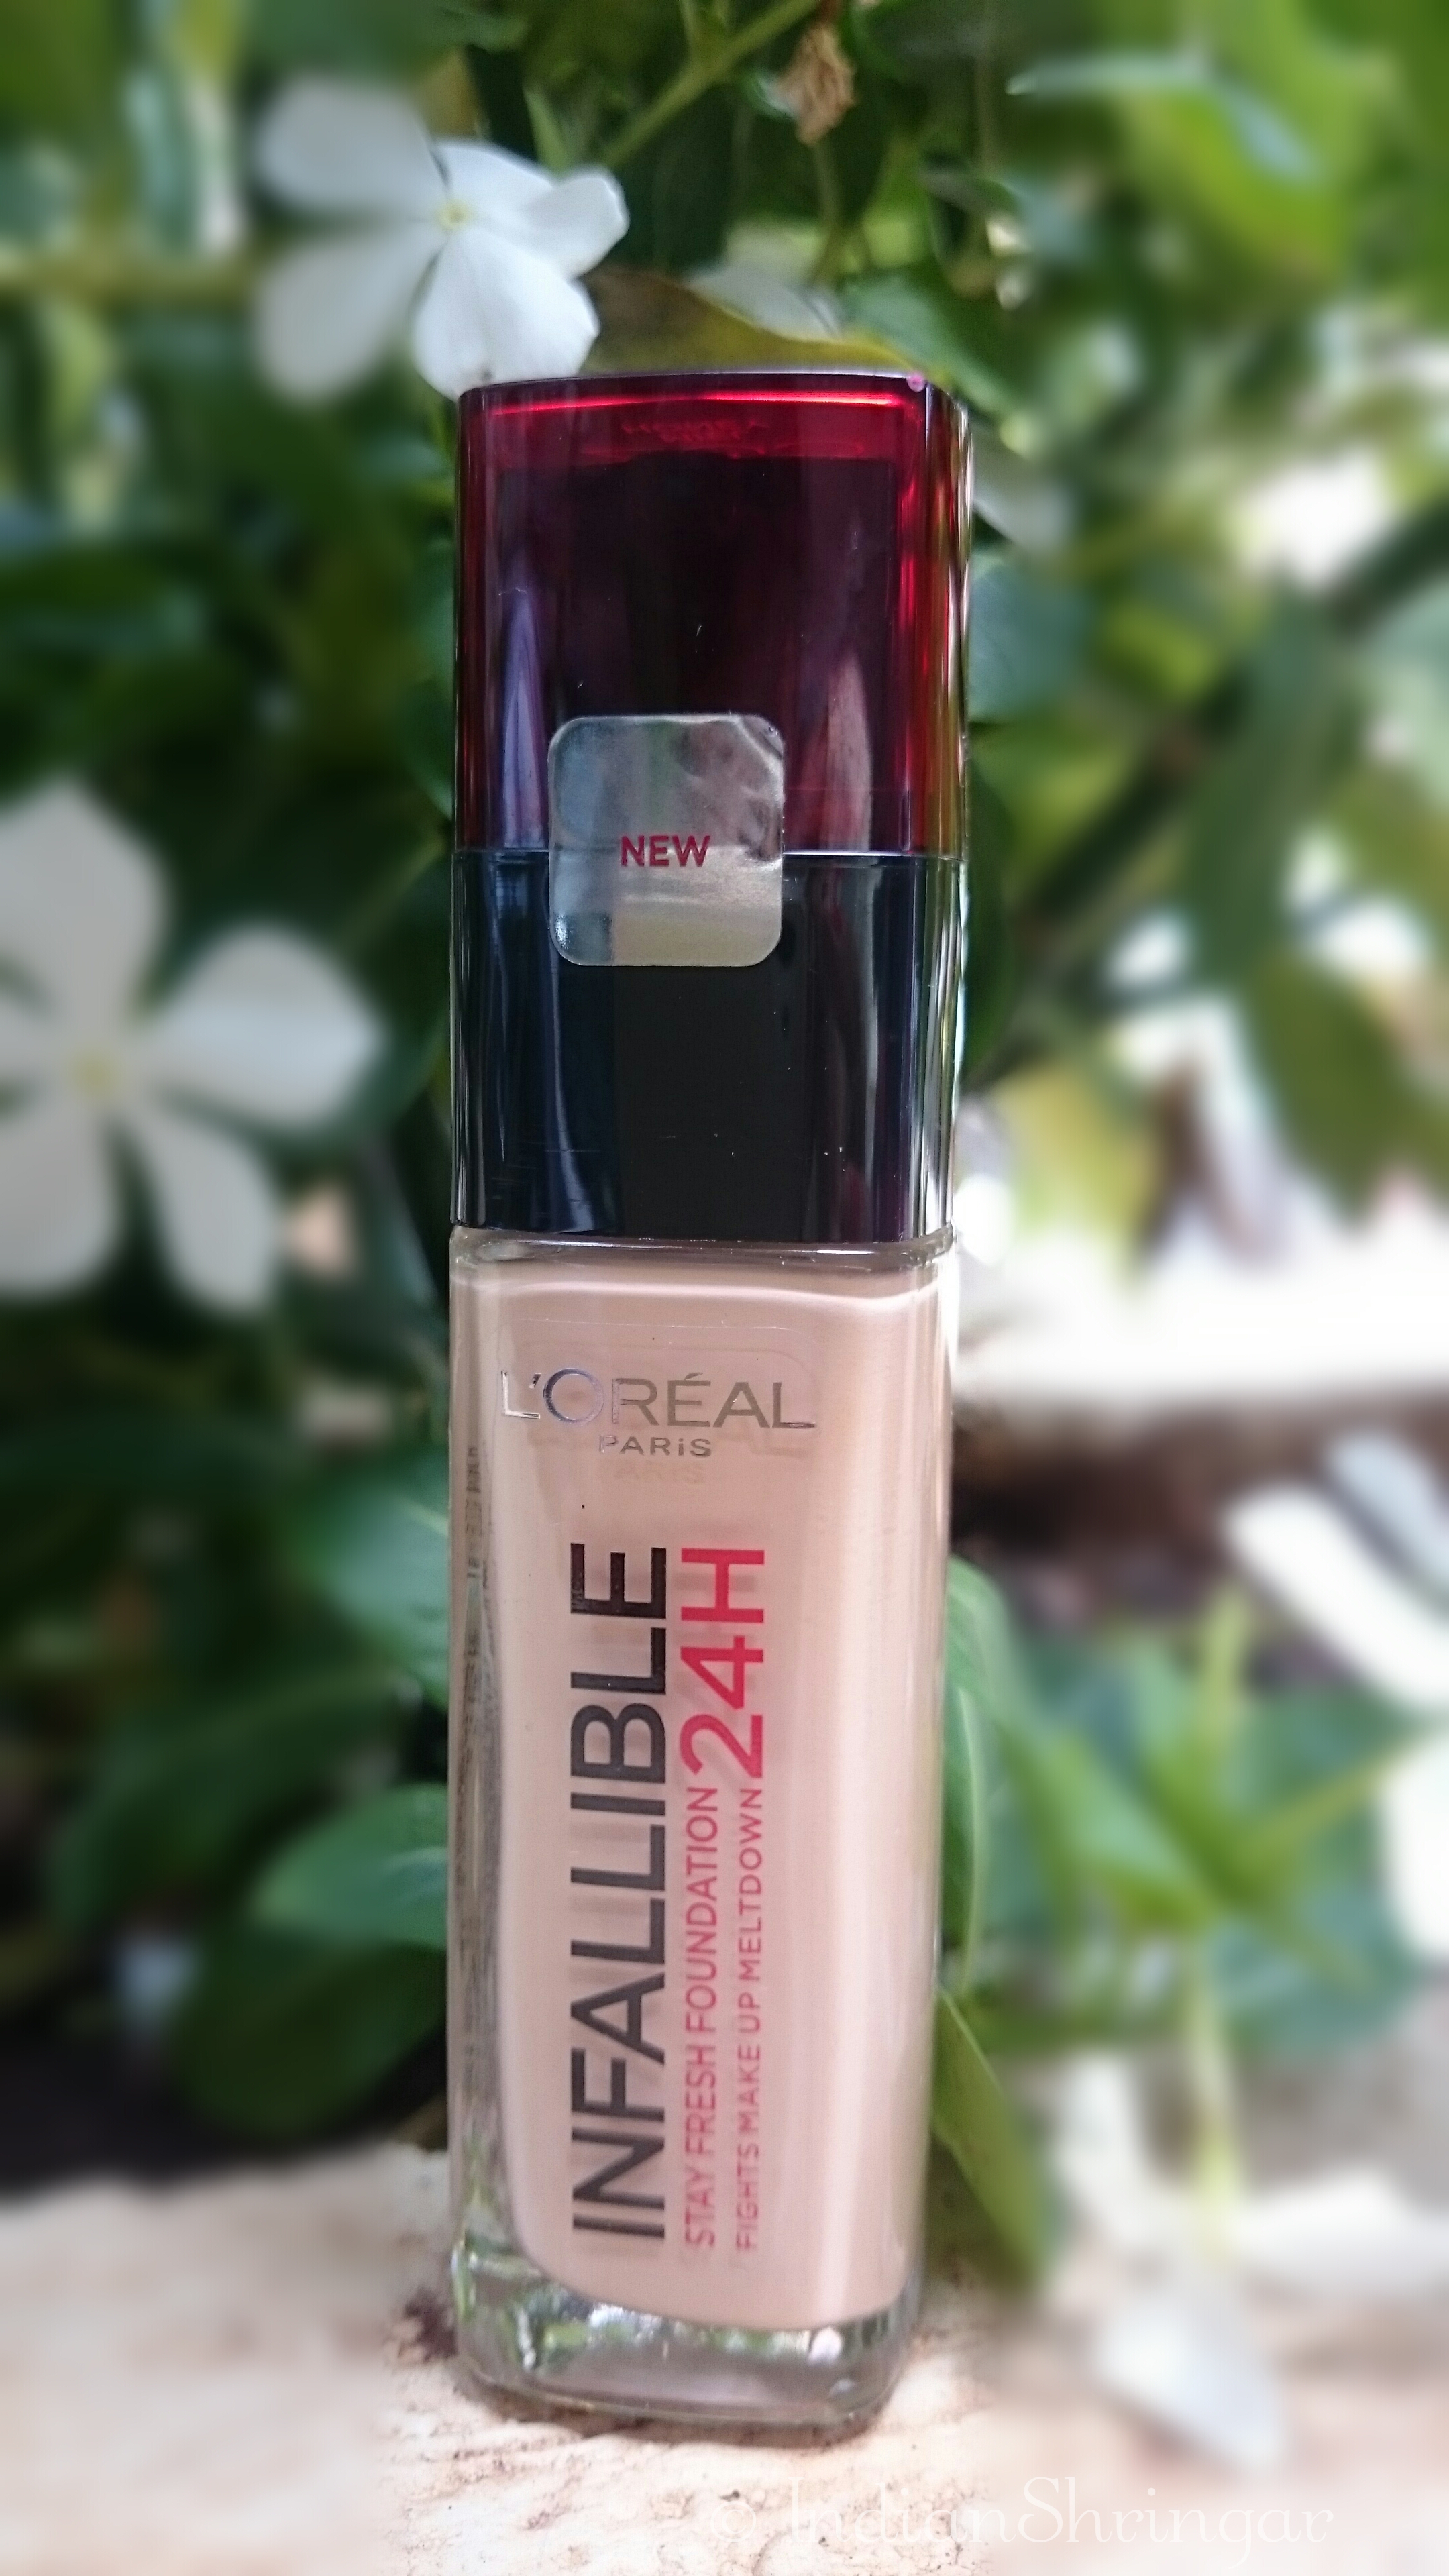 L'Oreal Infallible Stay Fresh Foundation - review, swatch, FOTD